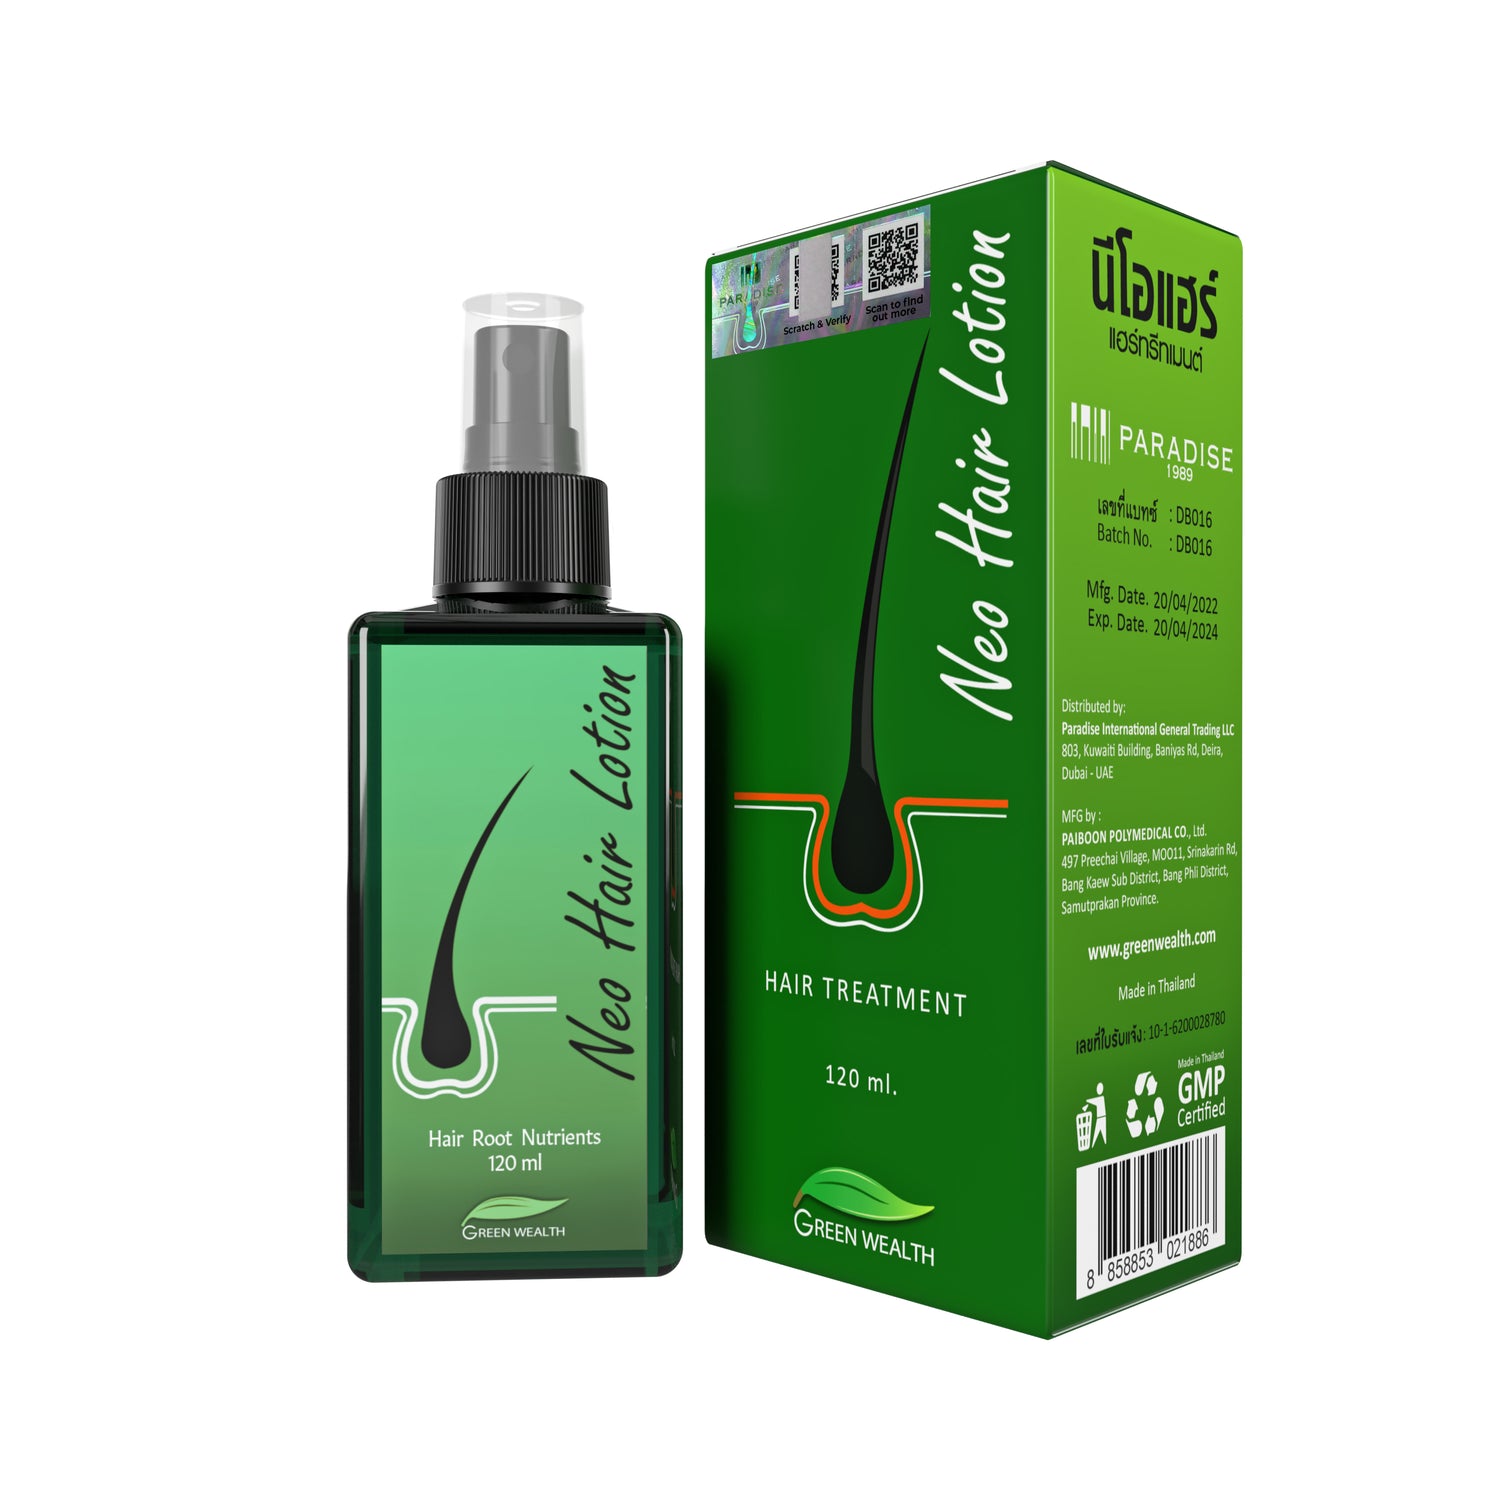 GREEN WEALTH NEO HAIR LOTION